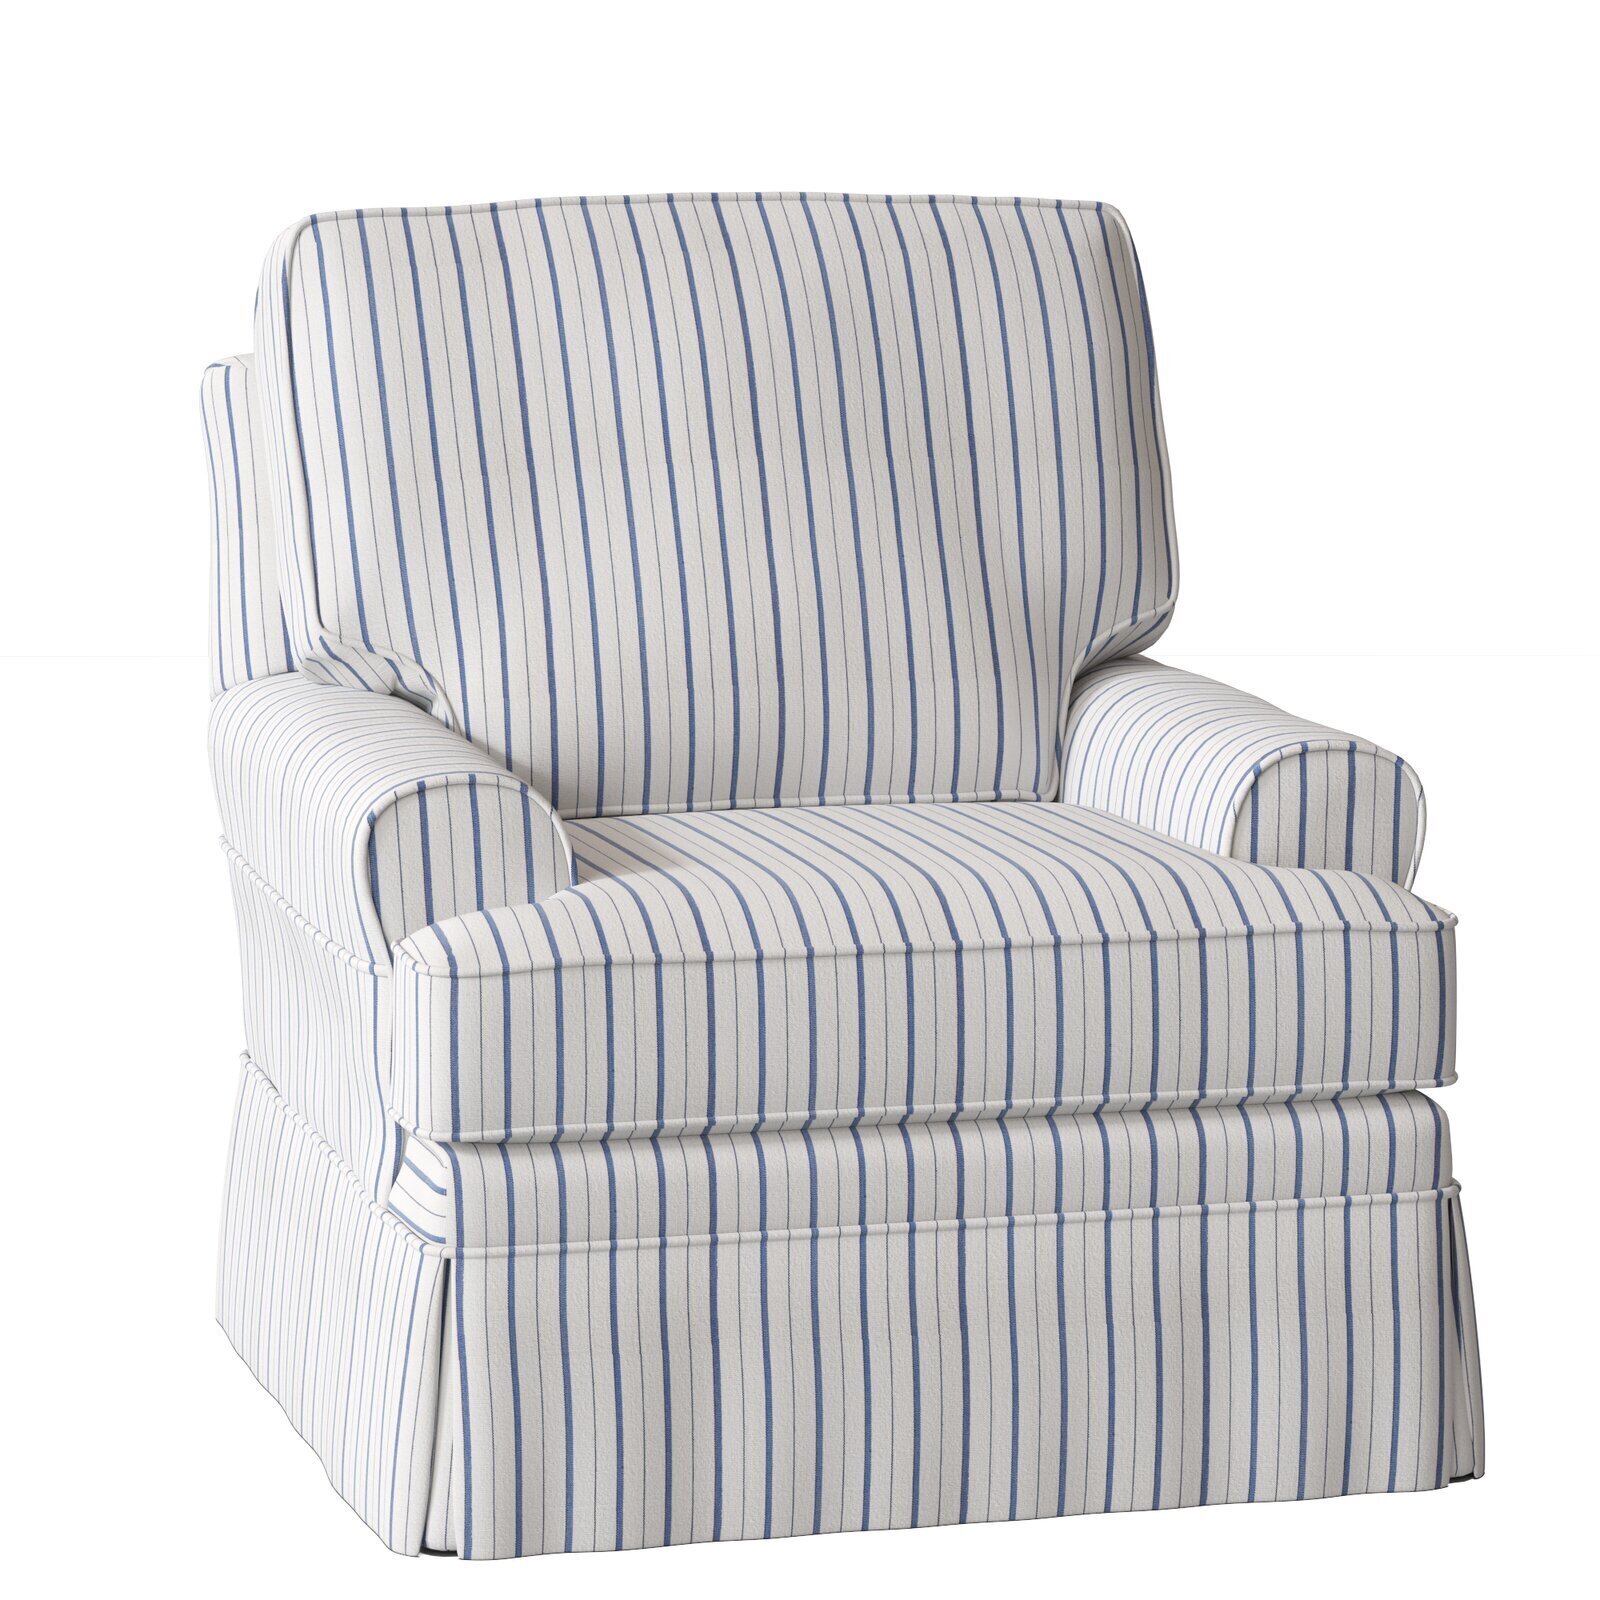 Blue and White Stripe Chair with Skirt